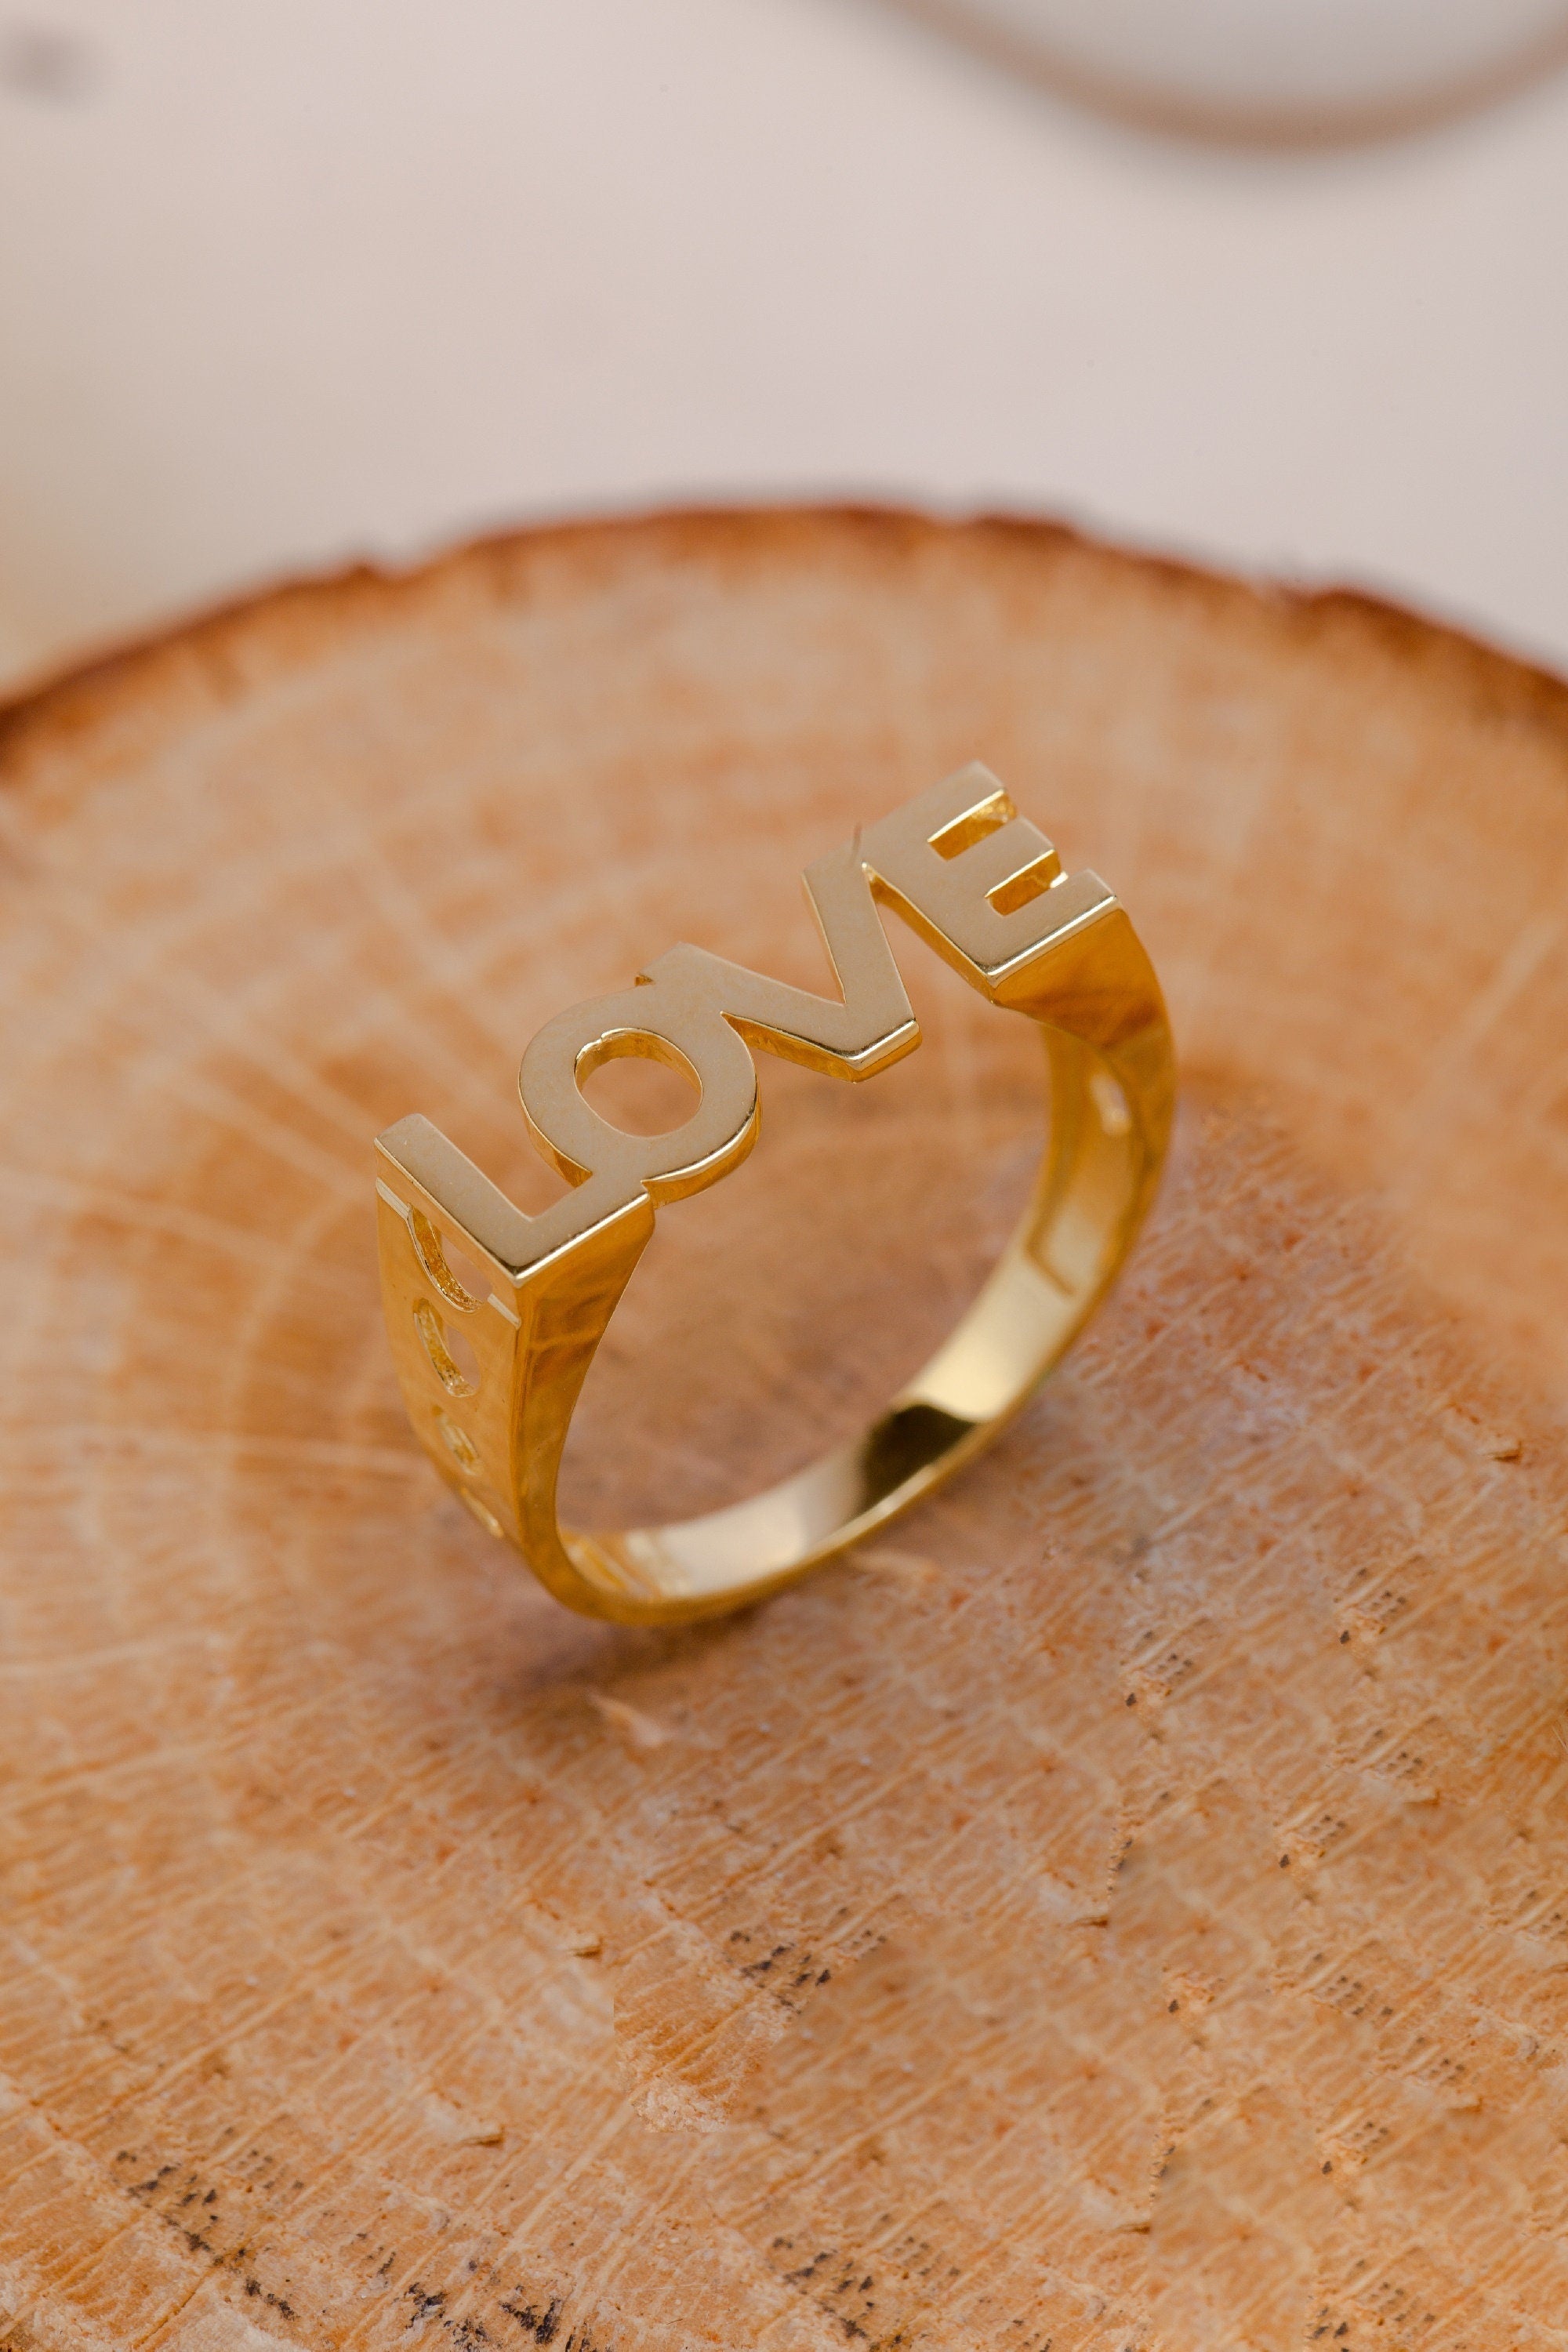 Minimalist Love Ring - 14K Gold or 925 Sterling Silver - Rings for Women - Mother's Day Gift - Love Jewelry - Dainty Gold Ring